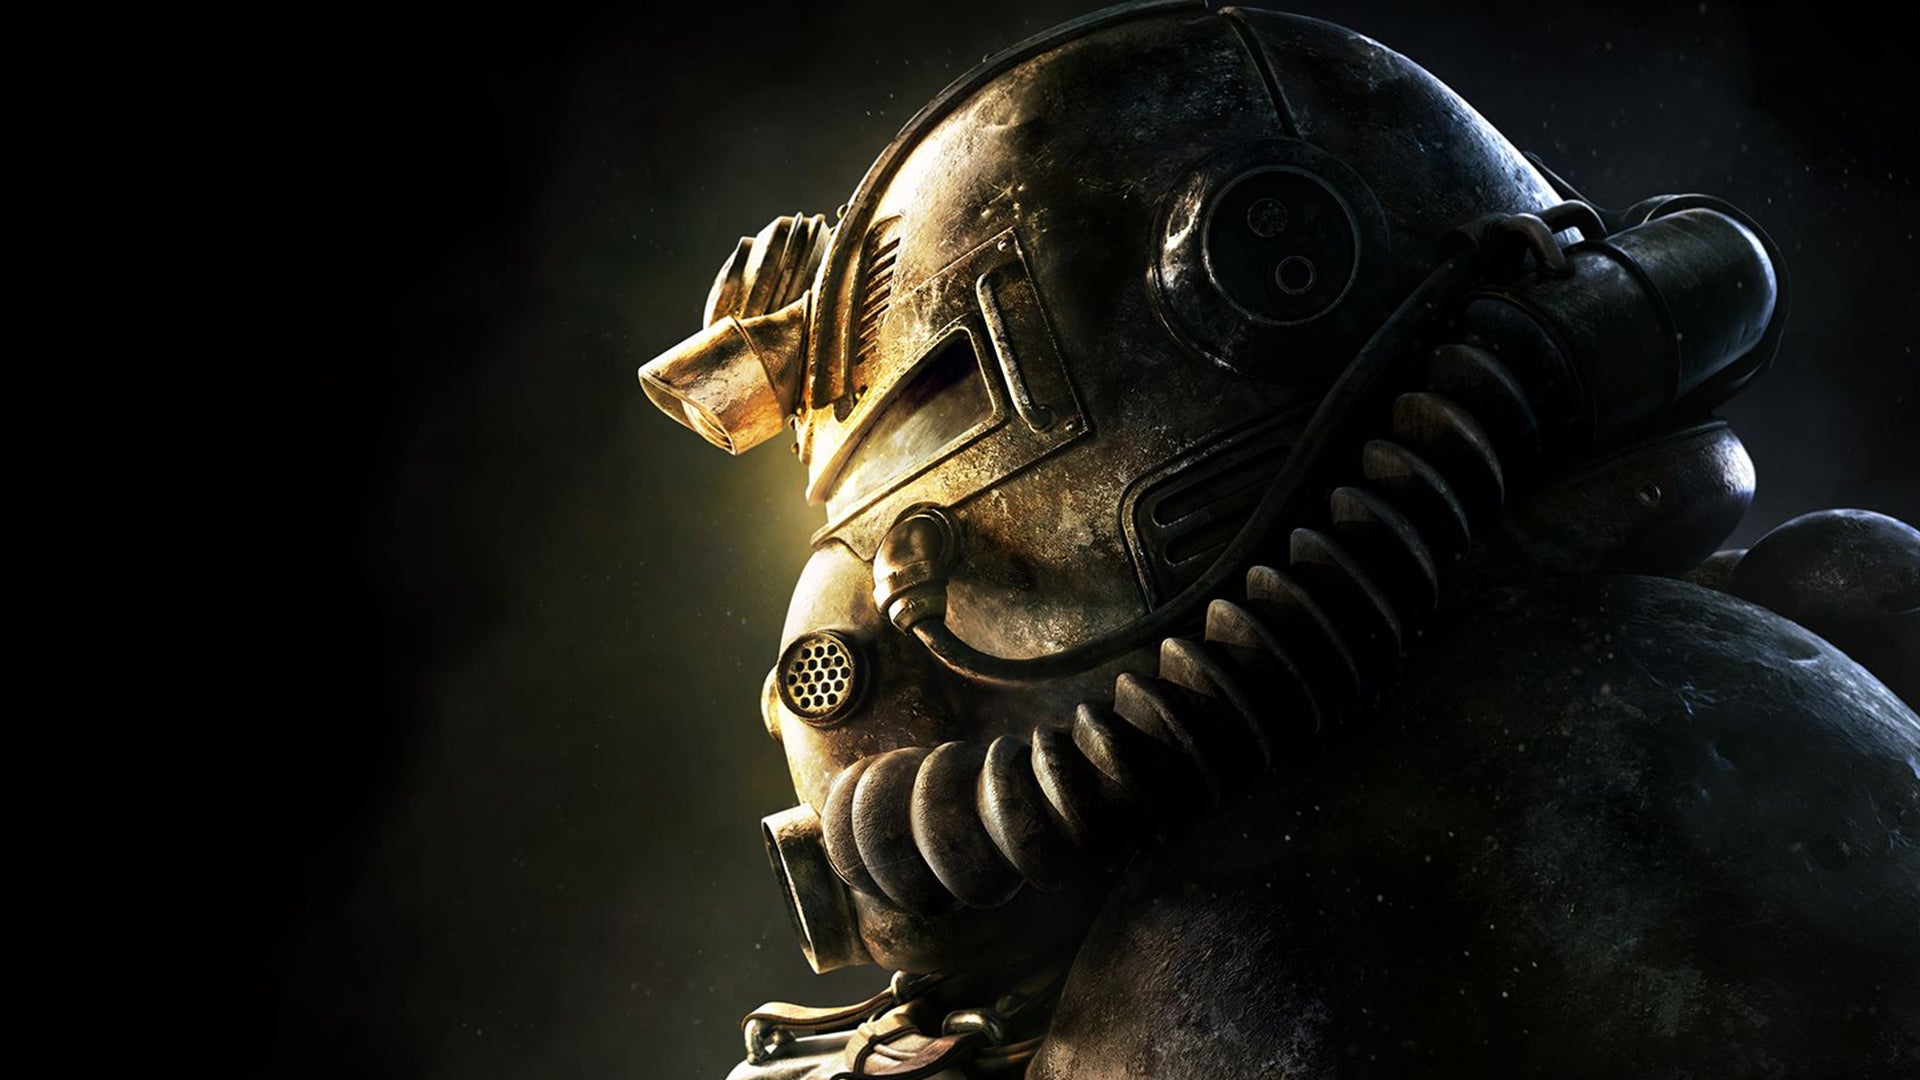 Image for Fallout 76 PC Analysis: The Best Way To Play - But Problems Remain